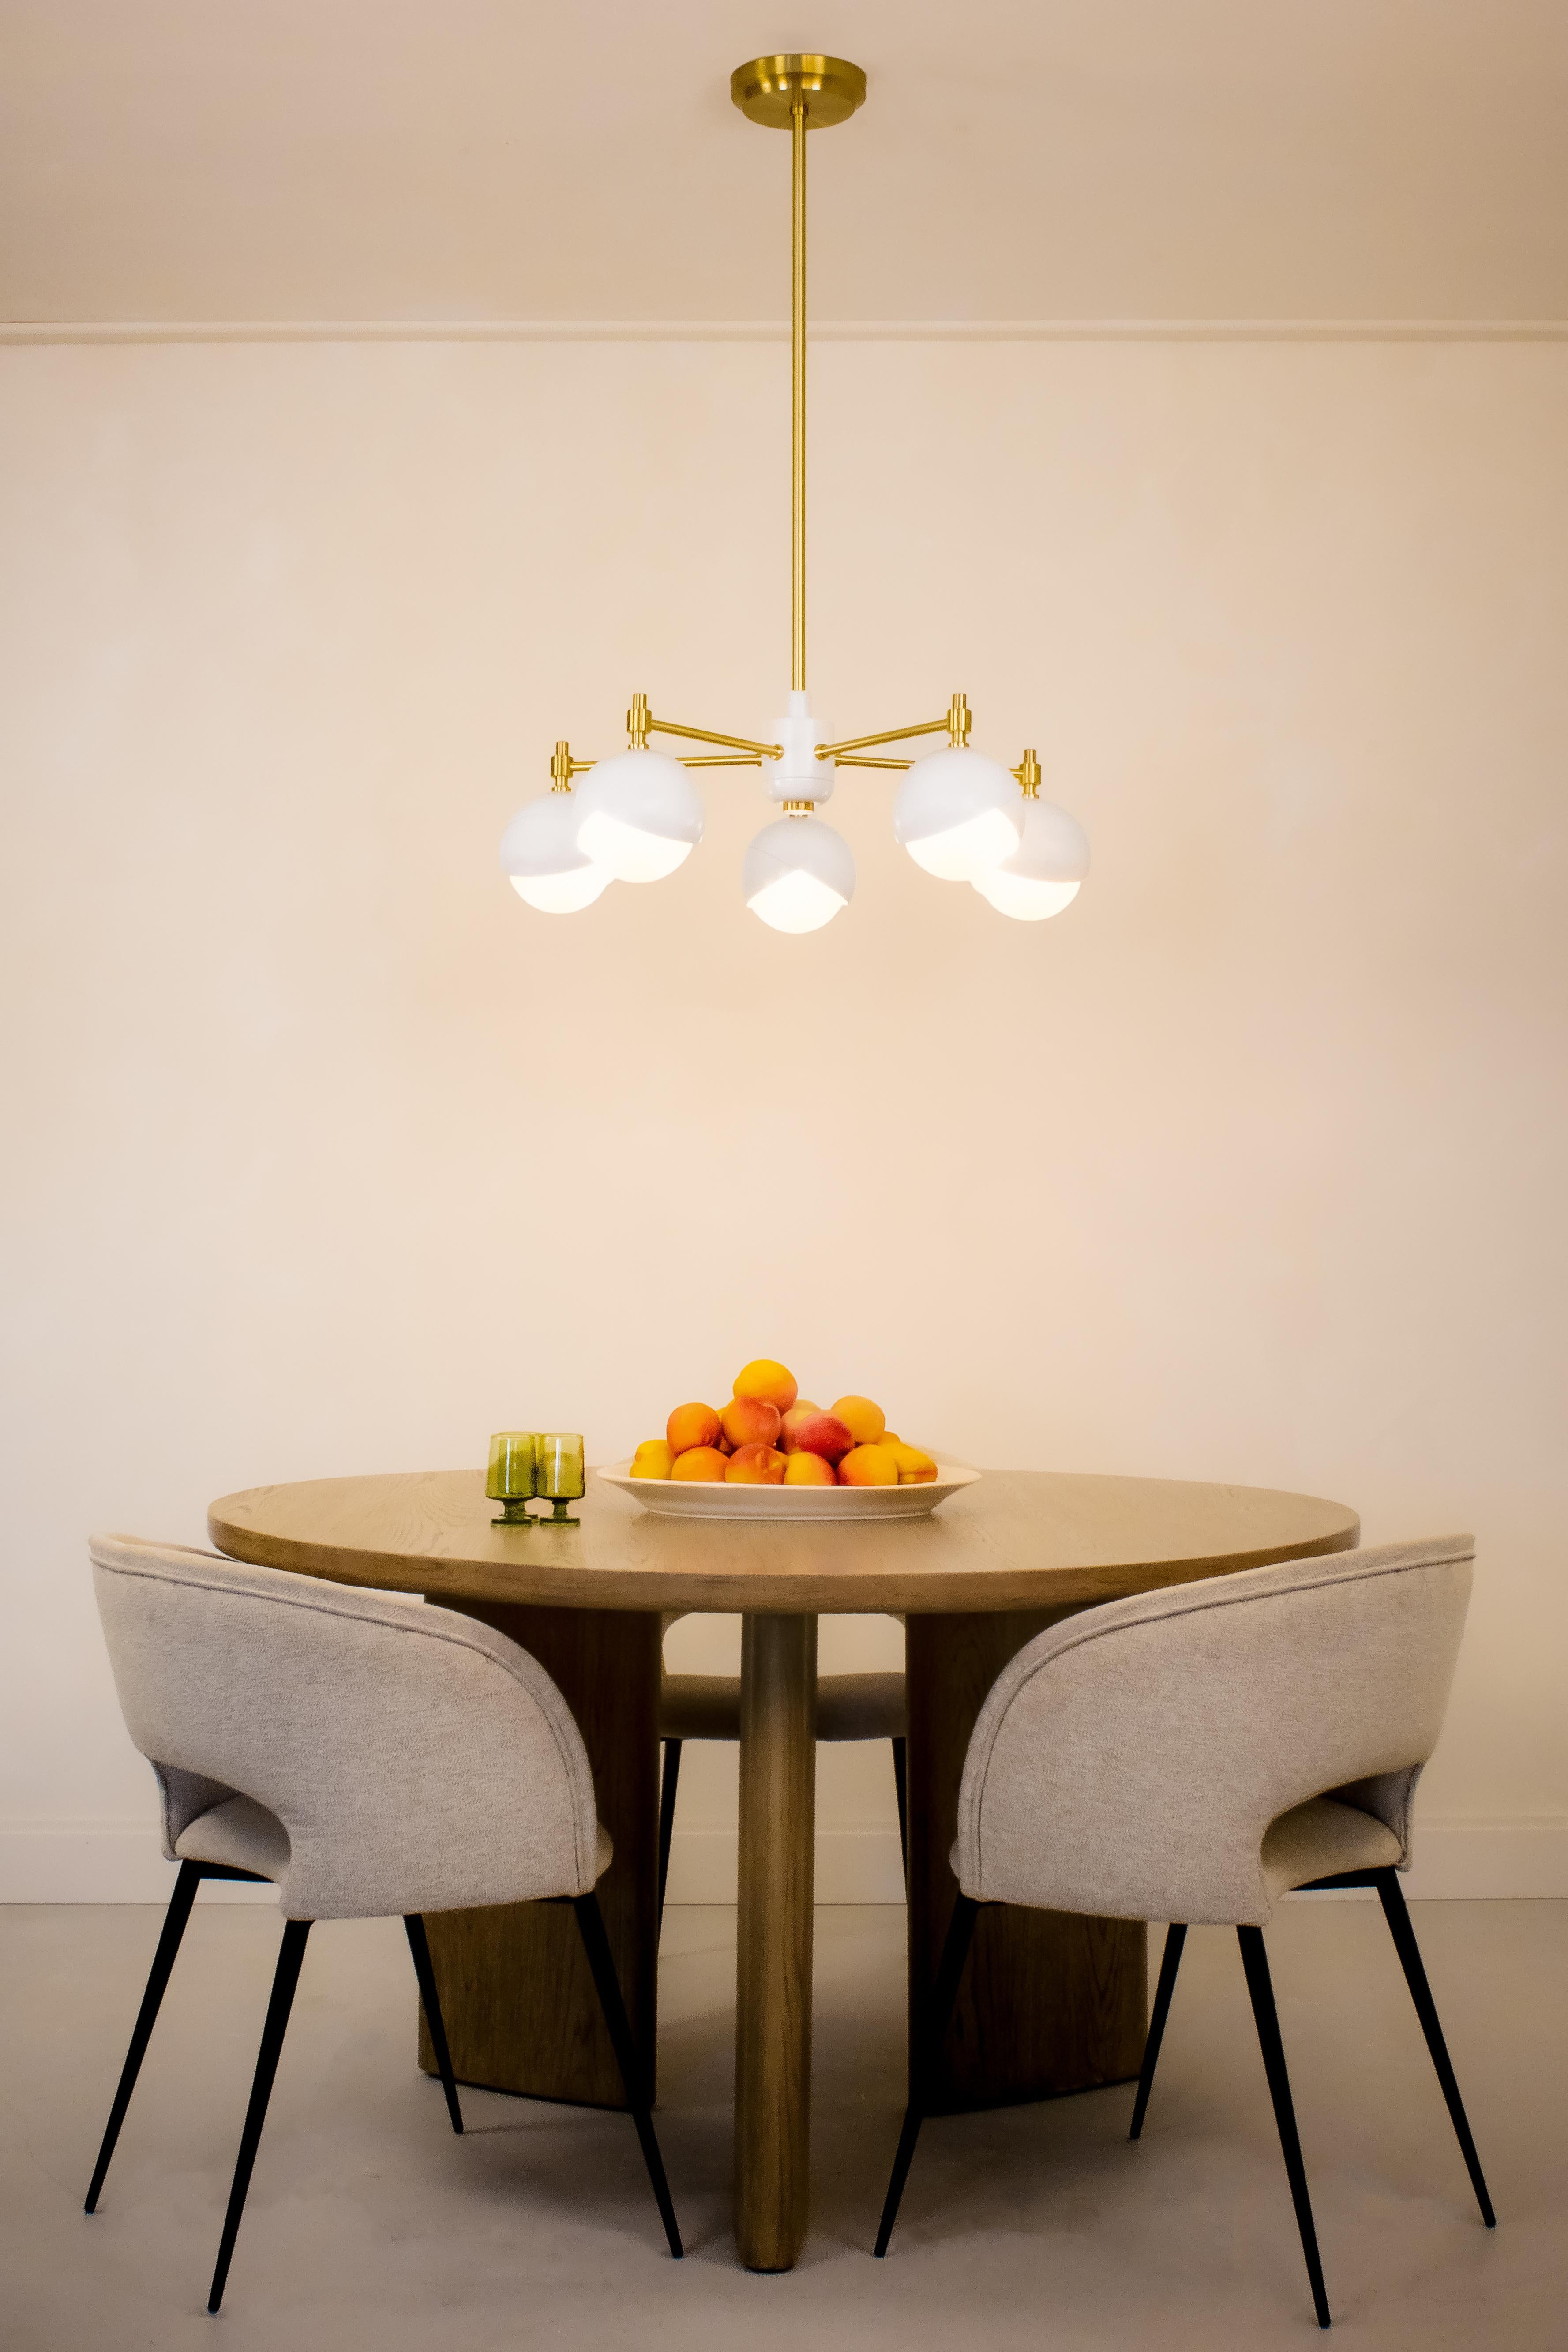 Benedict Five Light Chandelier in Adobe Powder Coat and Satin Brass In New Condition For Sale In Brooklyn, NY